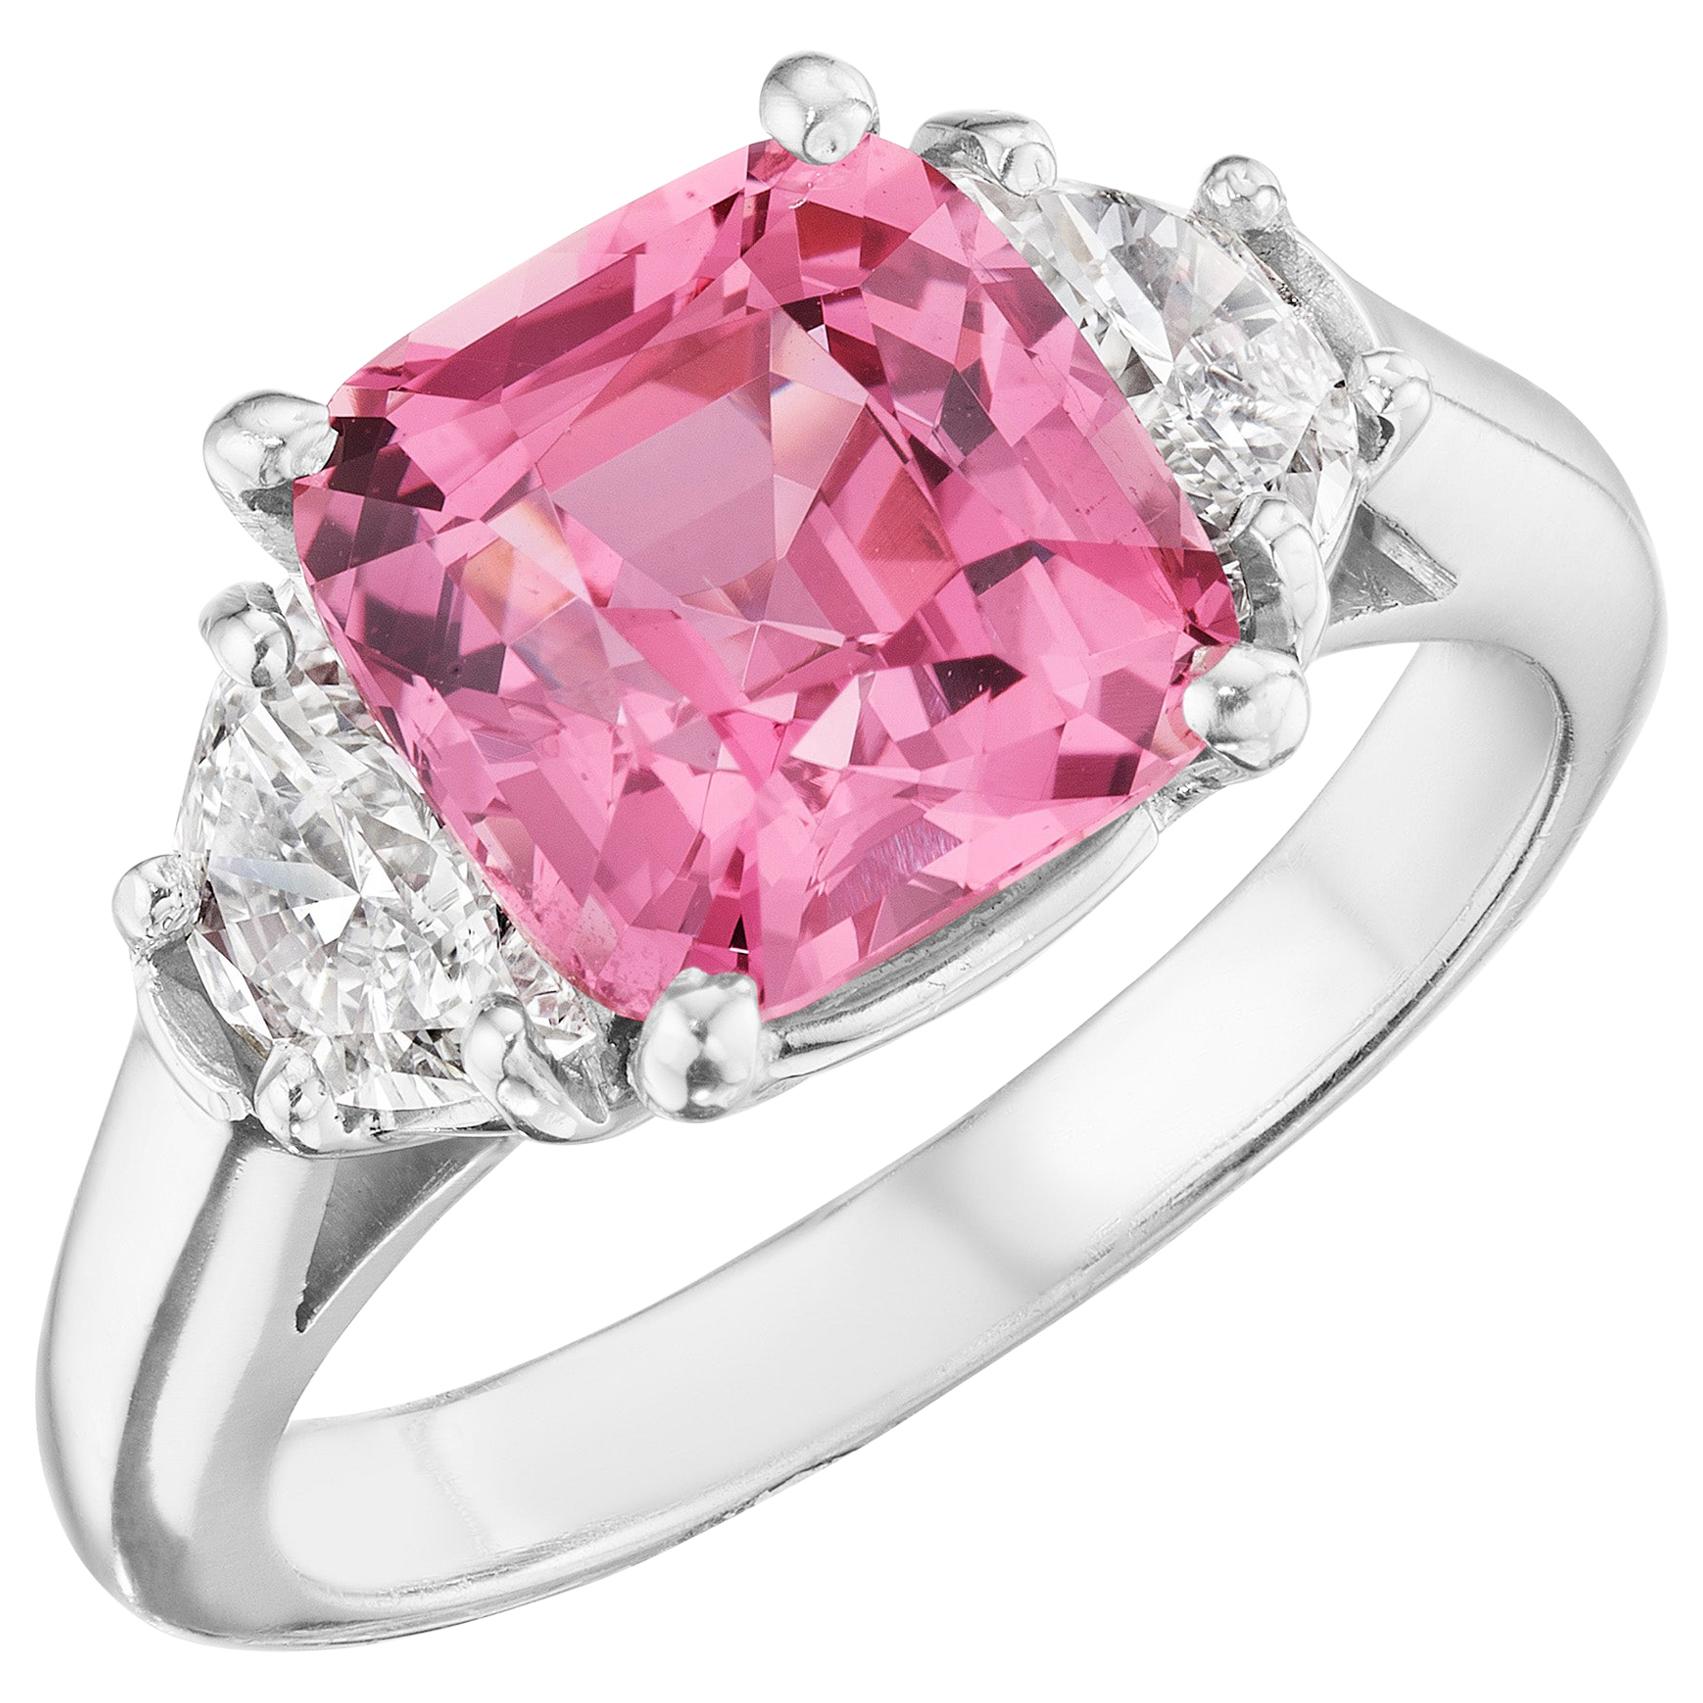 GIA Certified 3.95 Carat Natural Pink Sapphire Ring in Platinum For Sale